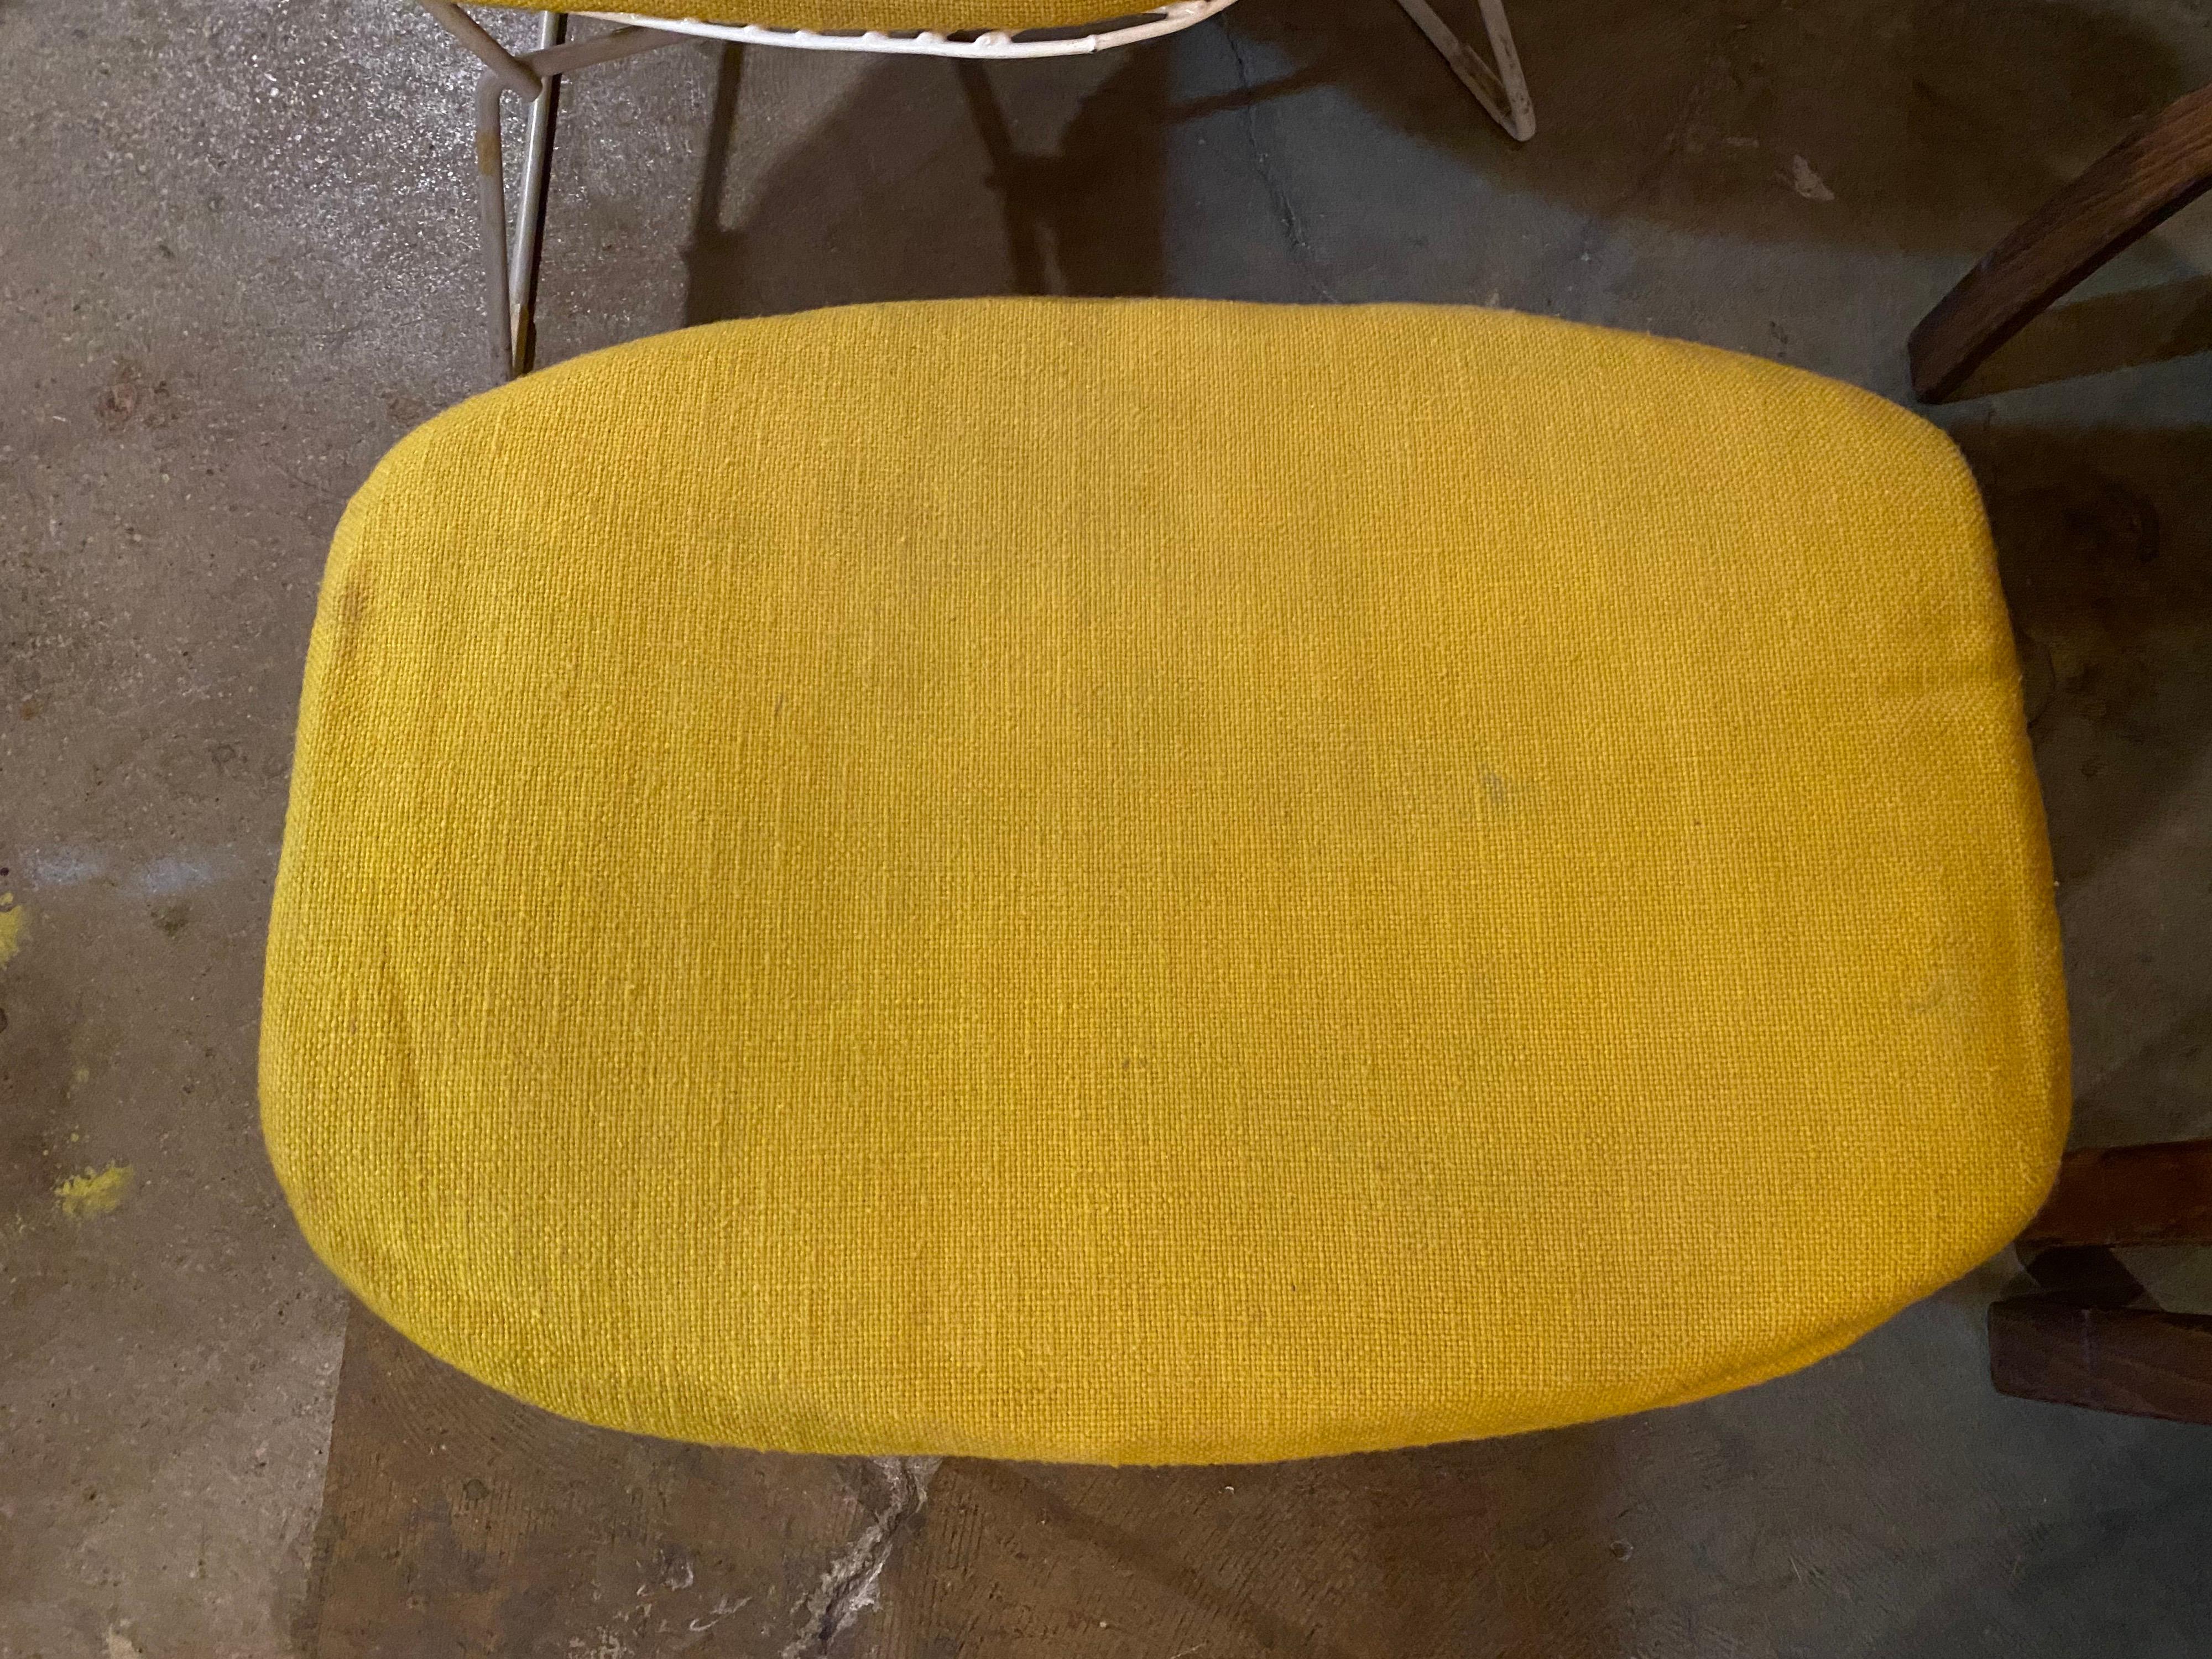 A classic mid-century design that is well-recognized, the bird chair and ottoman by Bertoia for knoll features a white finish and canary yellow cover. Circa 1960s, original foam has a crunchy feel and replacement is recommended; knoll tags attached.